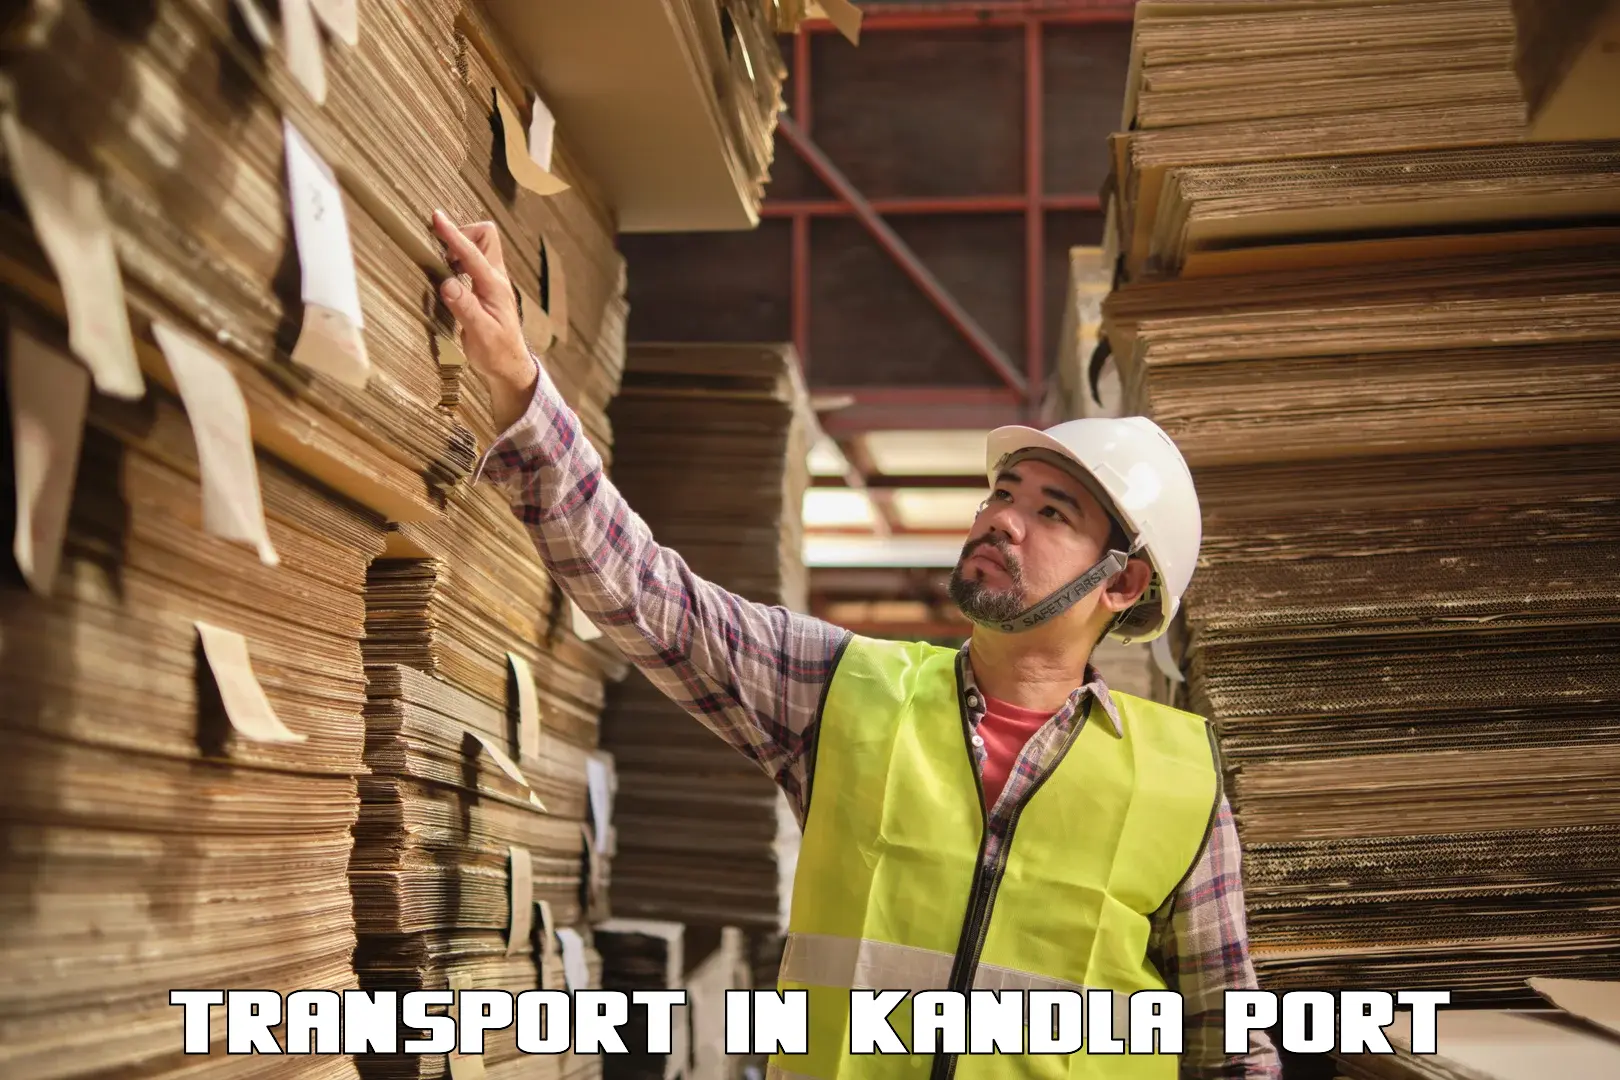 Container transport service in Kandla Port